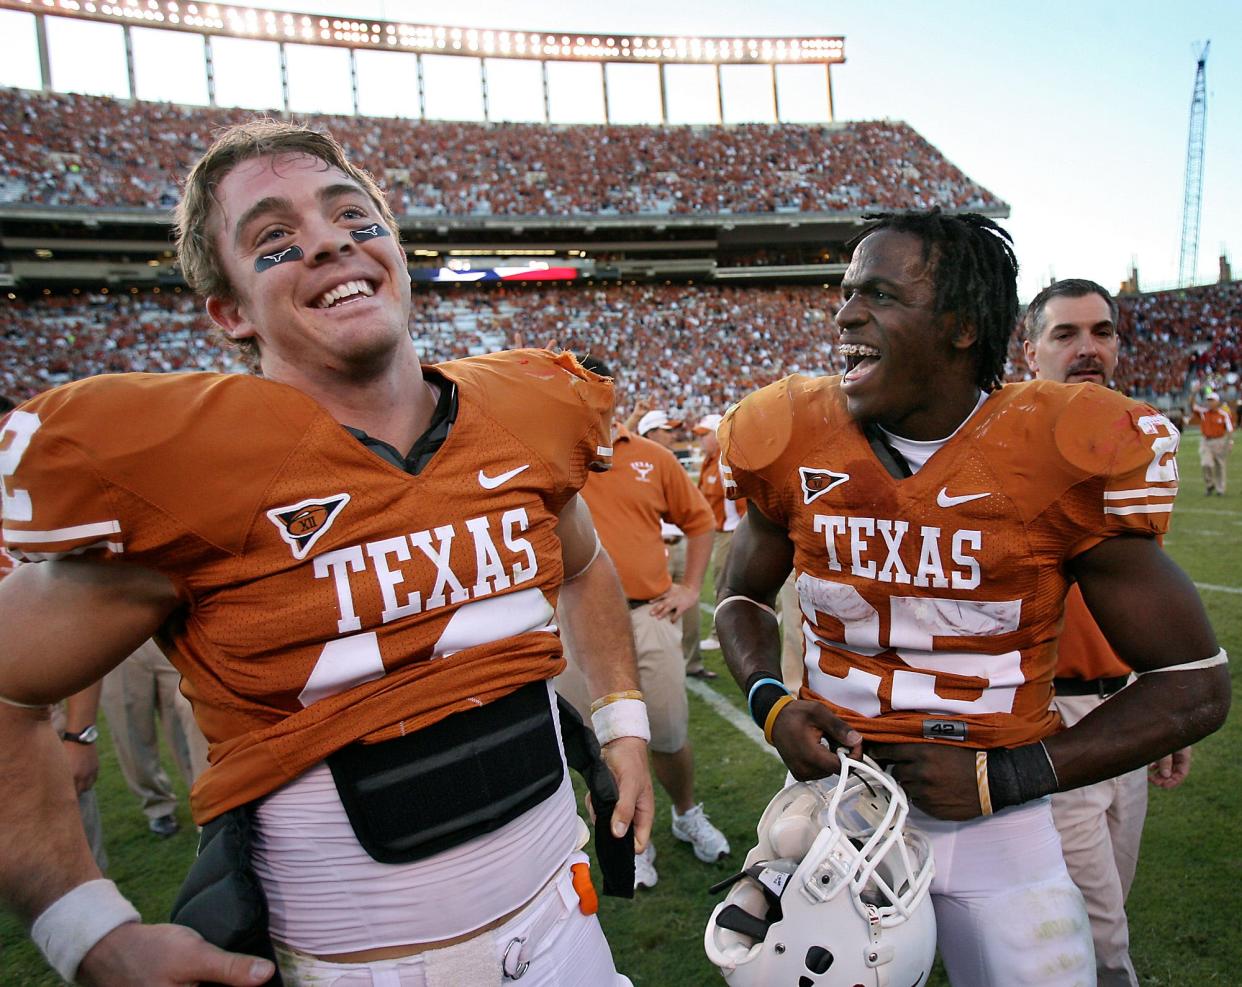 Texas quarterback Colt McCoy, left, and running back Jamaal Charles celebrate Charles' 290 yards rushing in a 28-25 win over Nebraska in 2007. They were the linchpins of Texas' 10-3 team that season. Charles left for the pros a year early and the Horns finished 12-1 the next year.